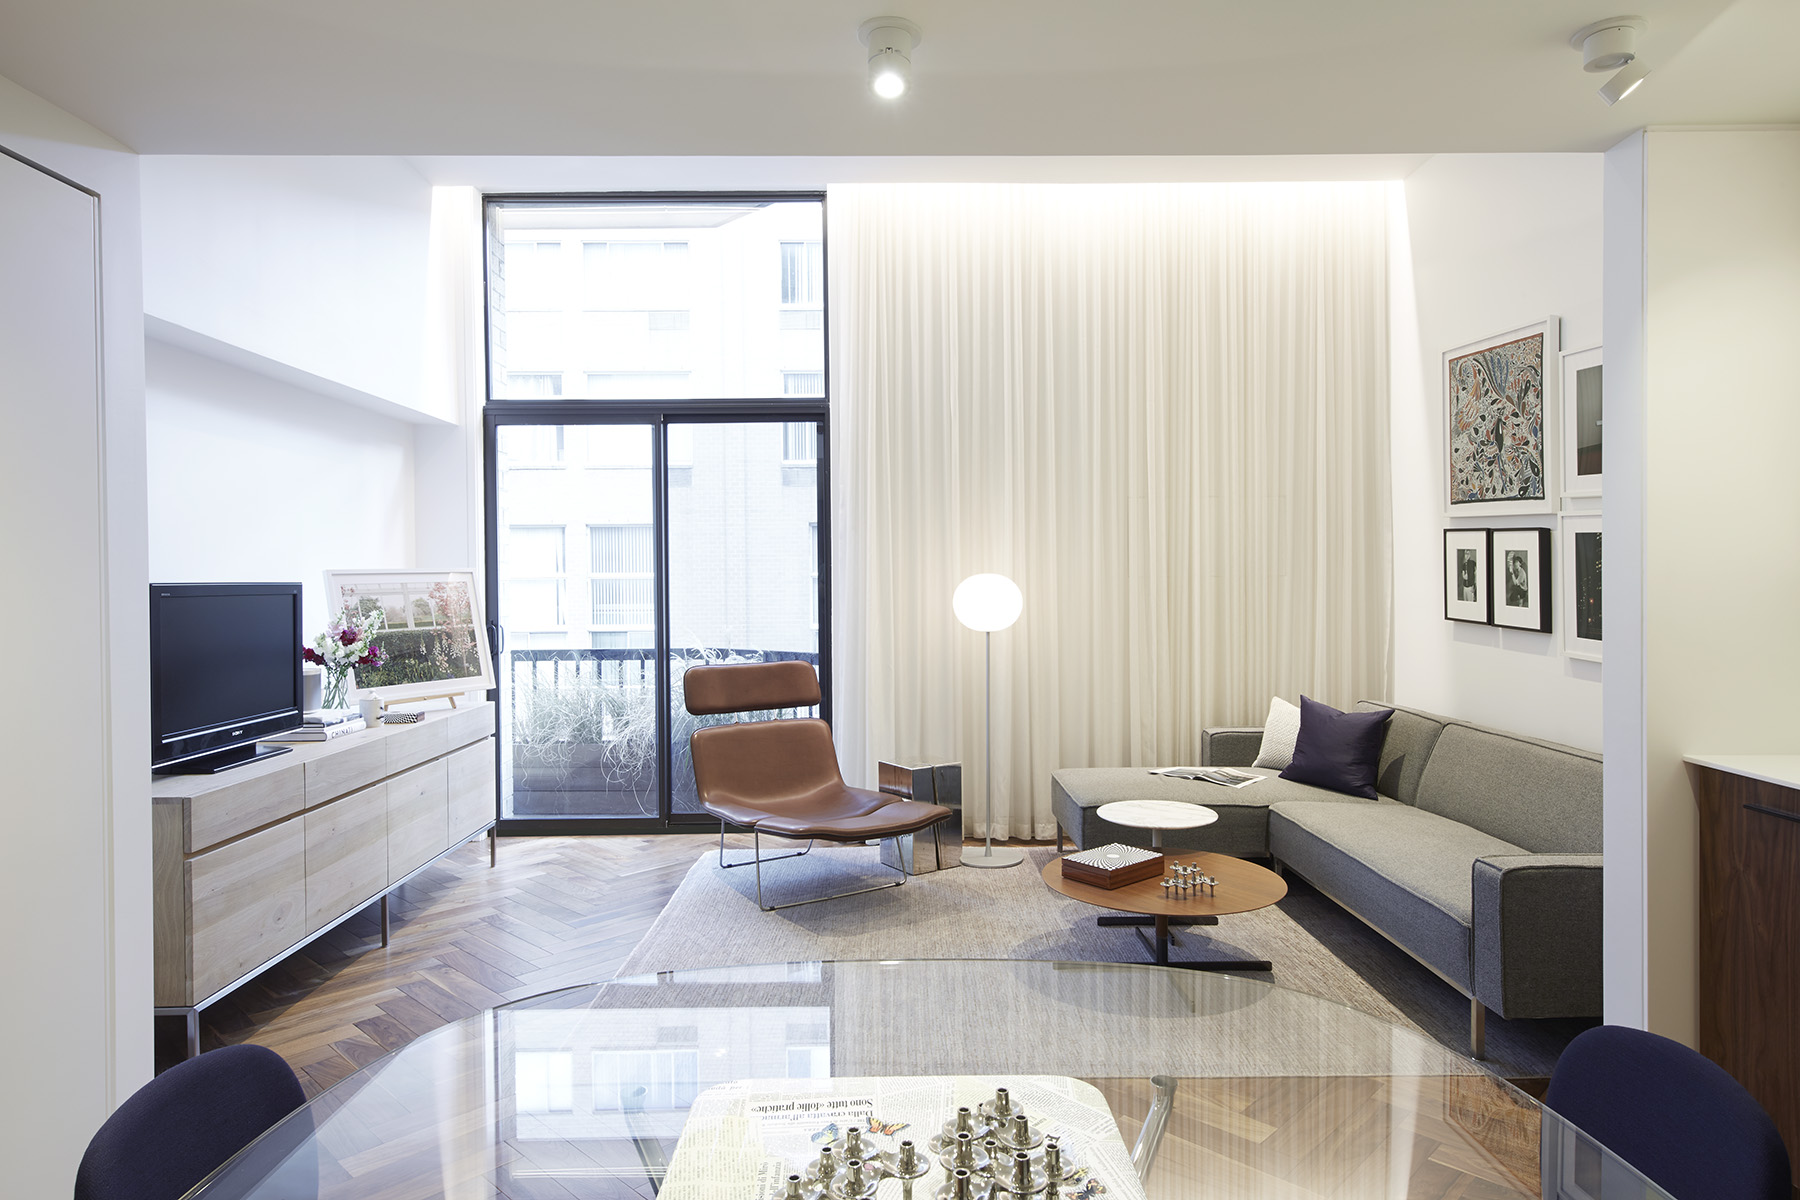 STADT Architecture, Gramercy Apartment, Cappellini, ABC Home, Walnut Floors, Glo Ball, Bob Tables, STADT, nyc architects, ny apartment renovation